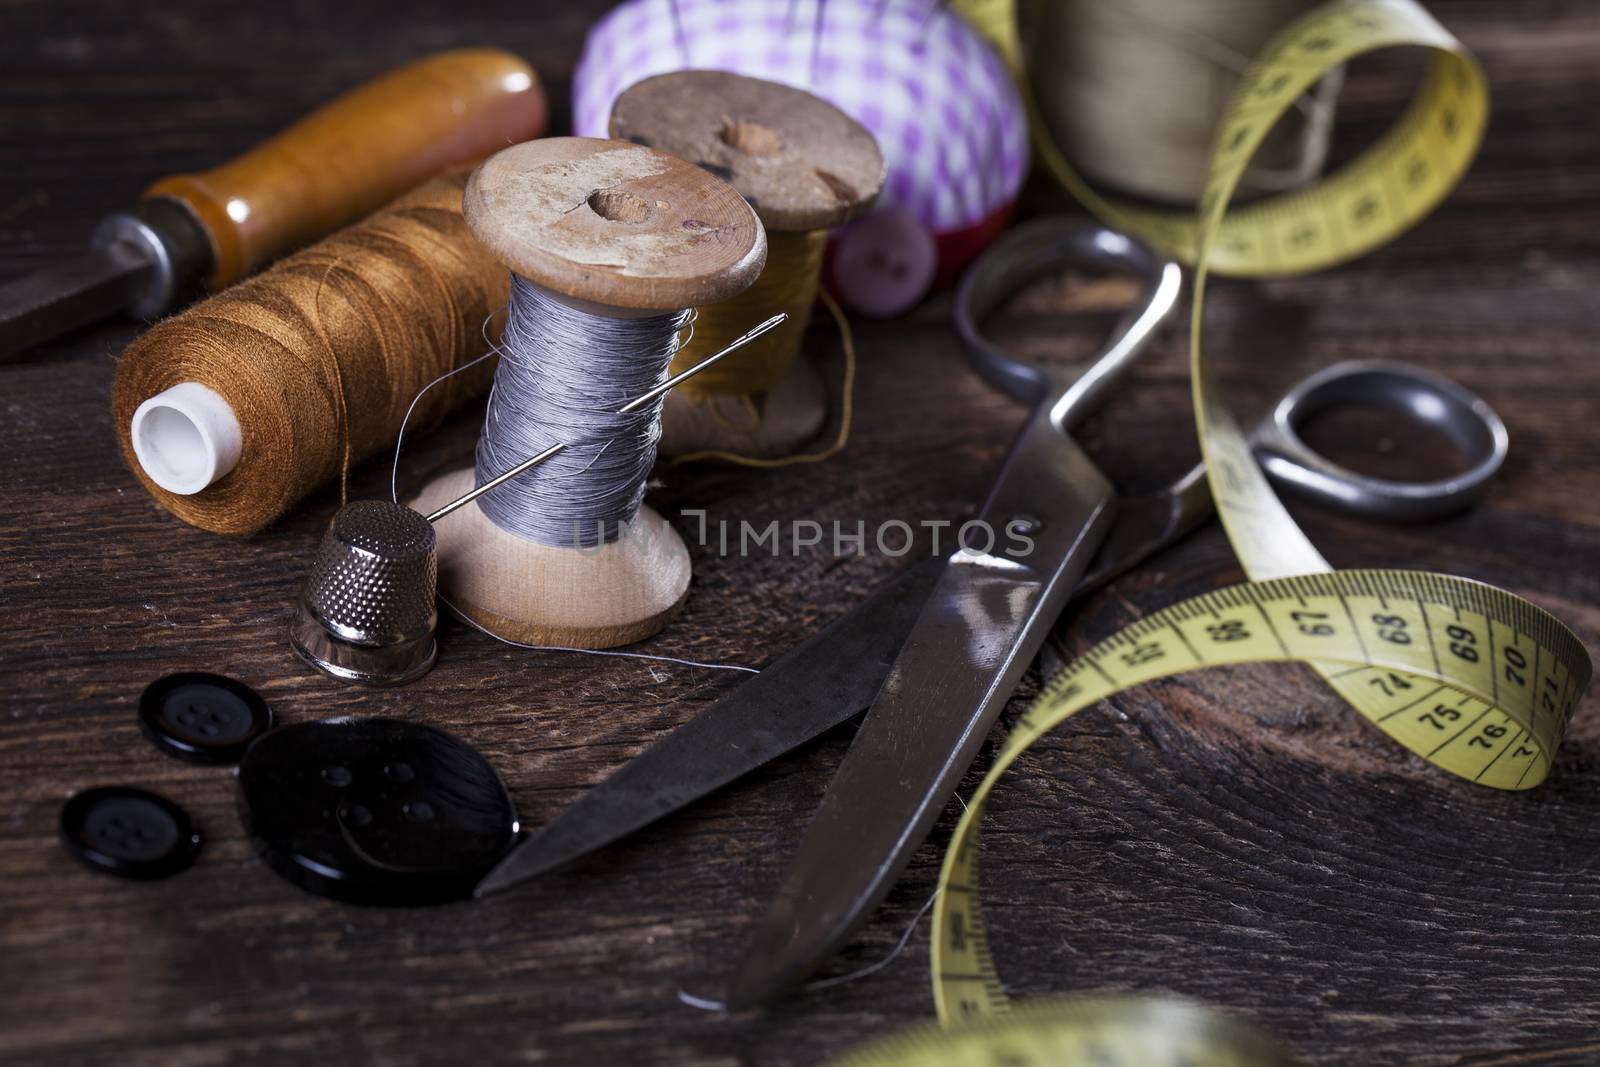 Sewing instruments, threads, needles, bobbins and materials. Studio photo